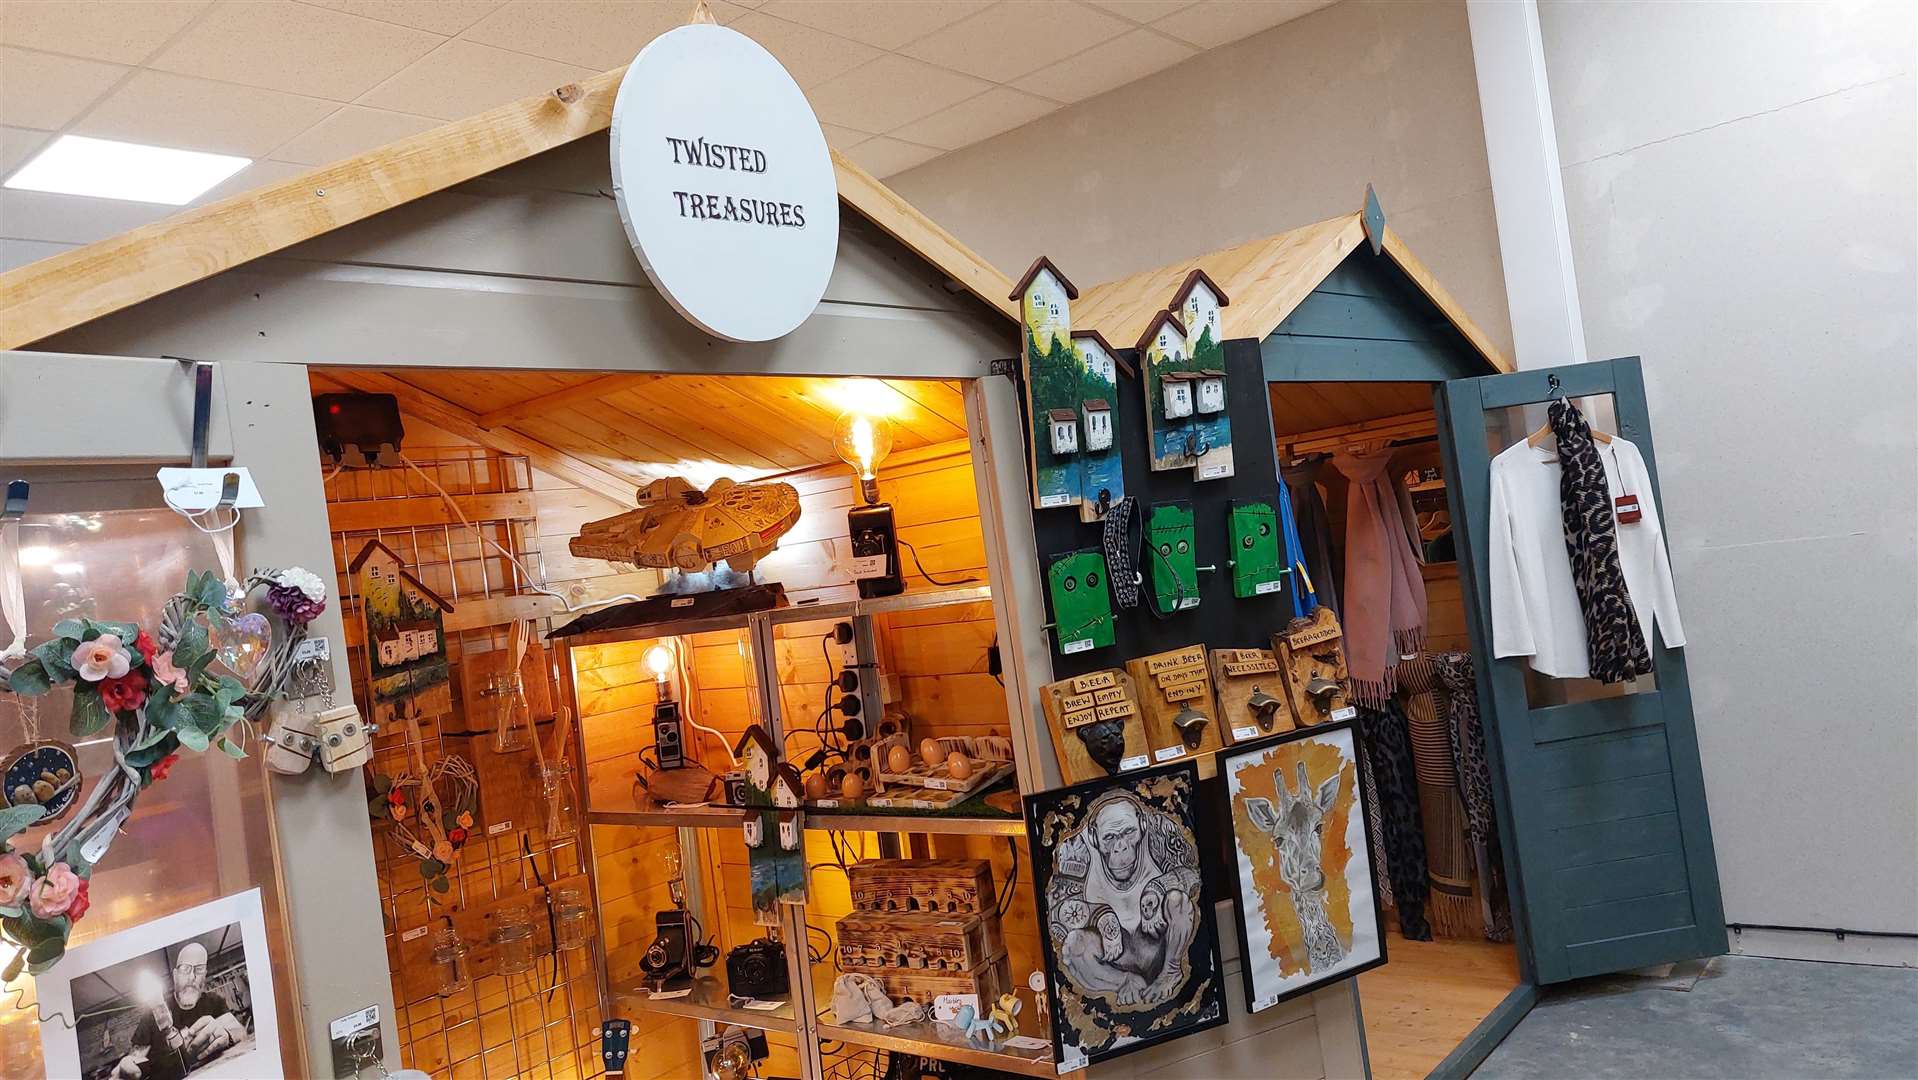 Twisted Treasures and a ladies clothing business each have a pod